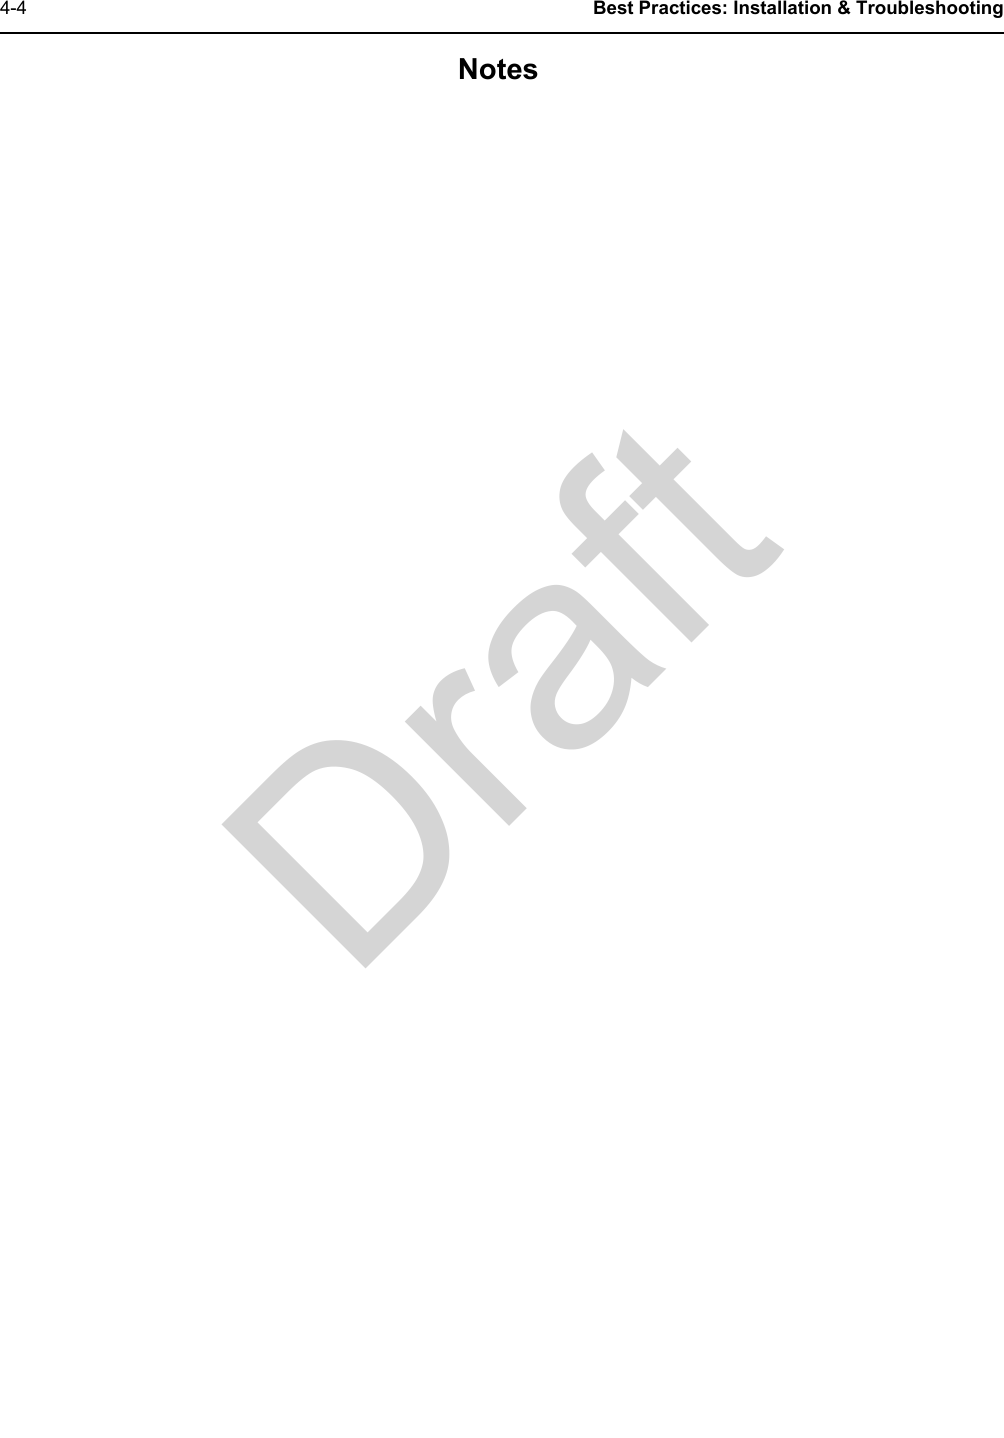 DraftNotes4-4 Best Practices: Installation &amp; Troubleshooting